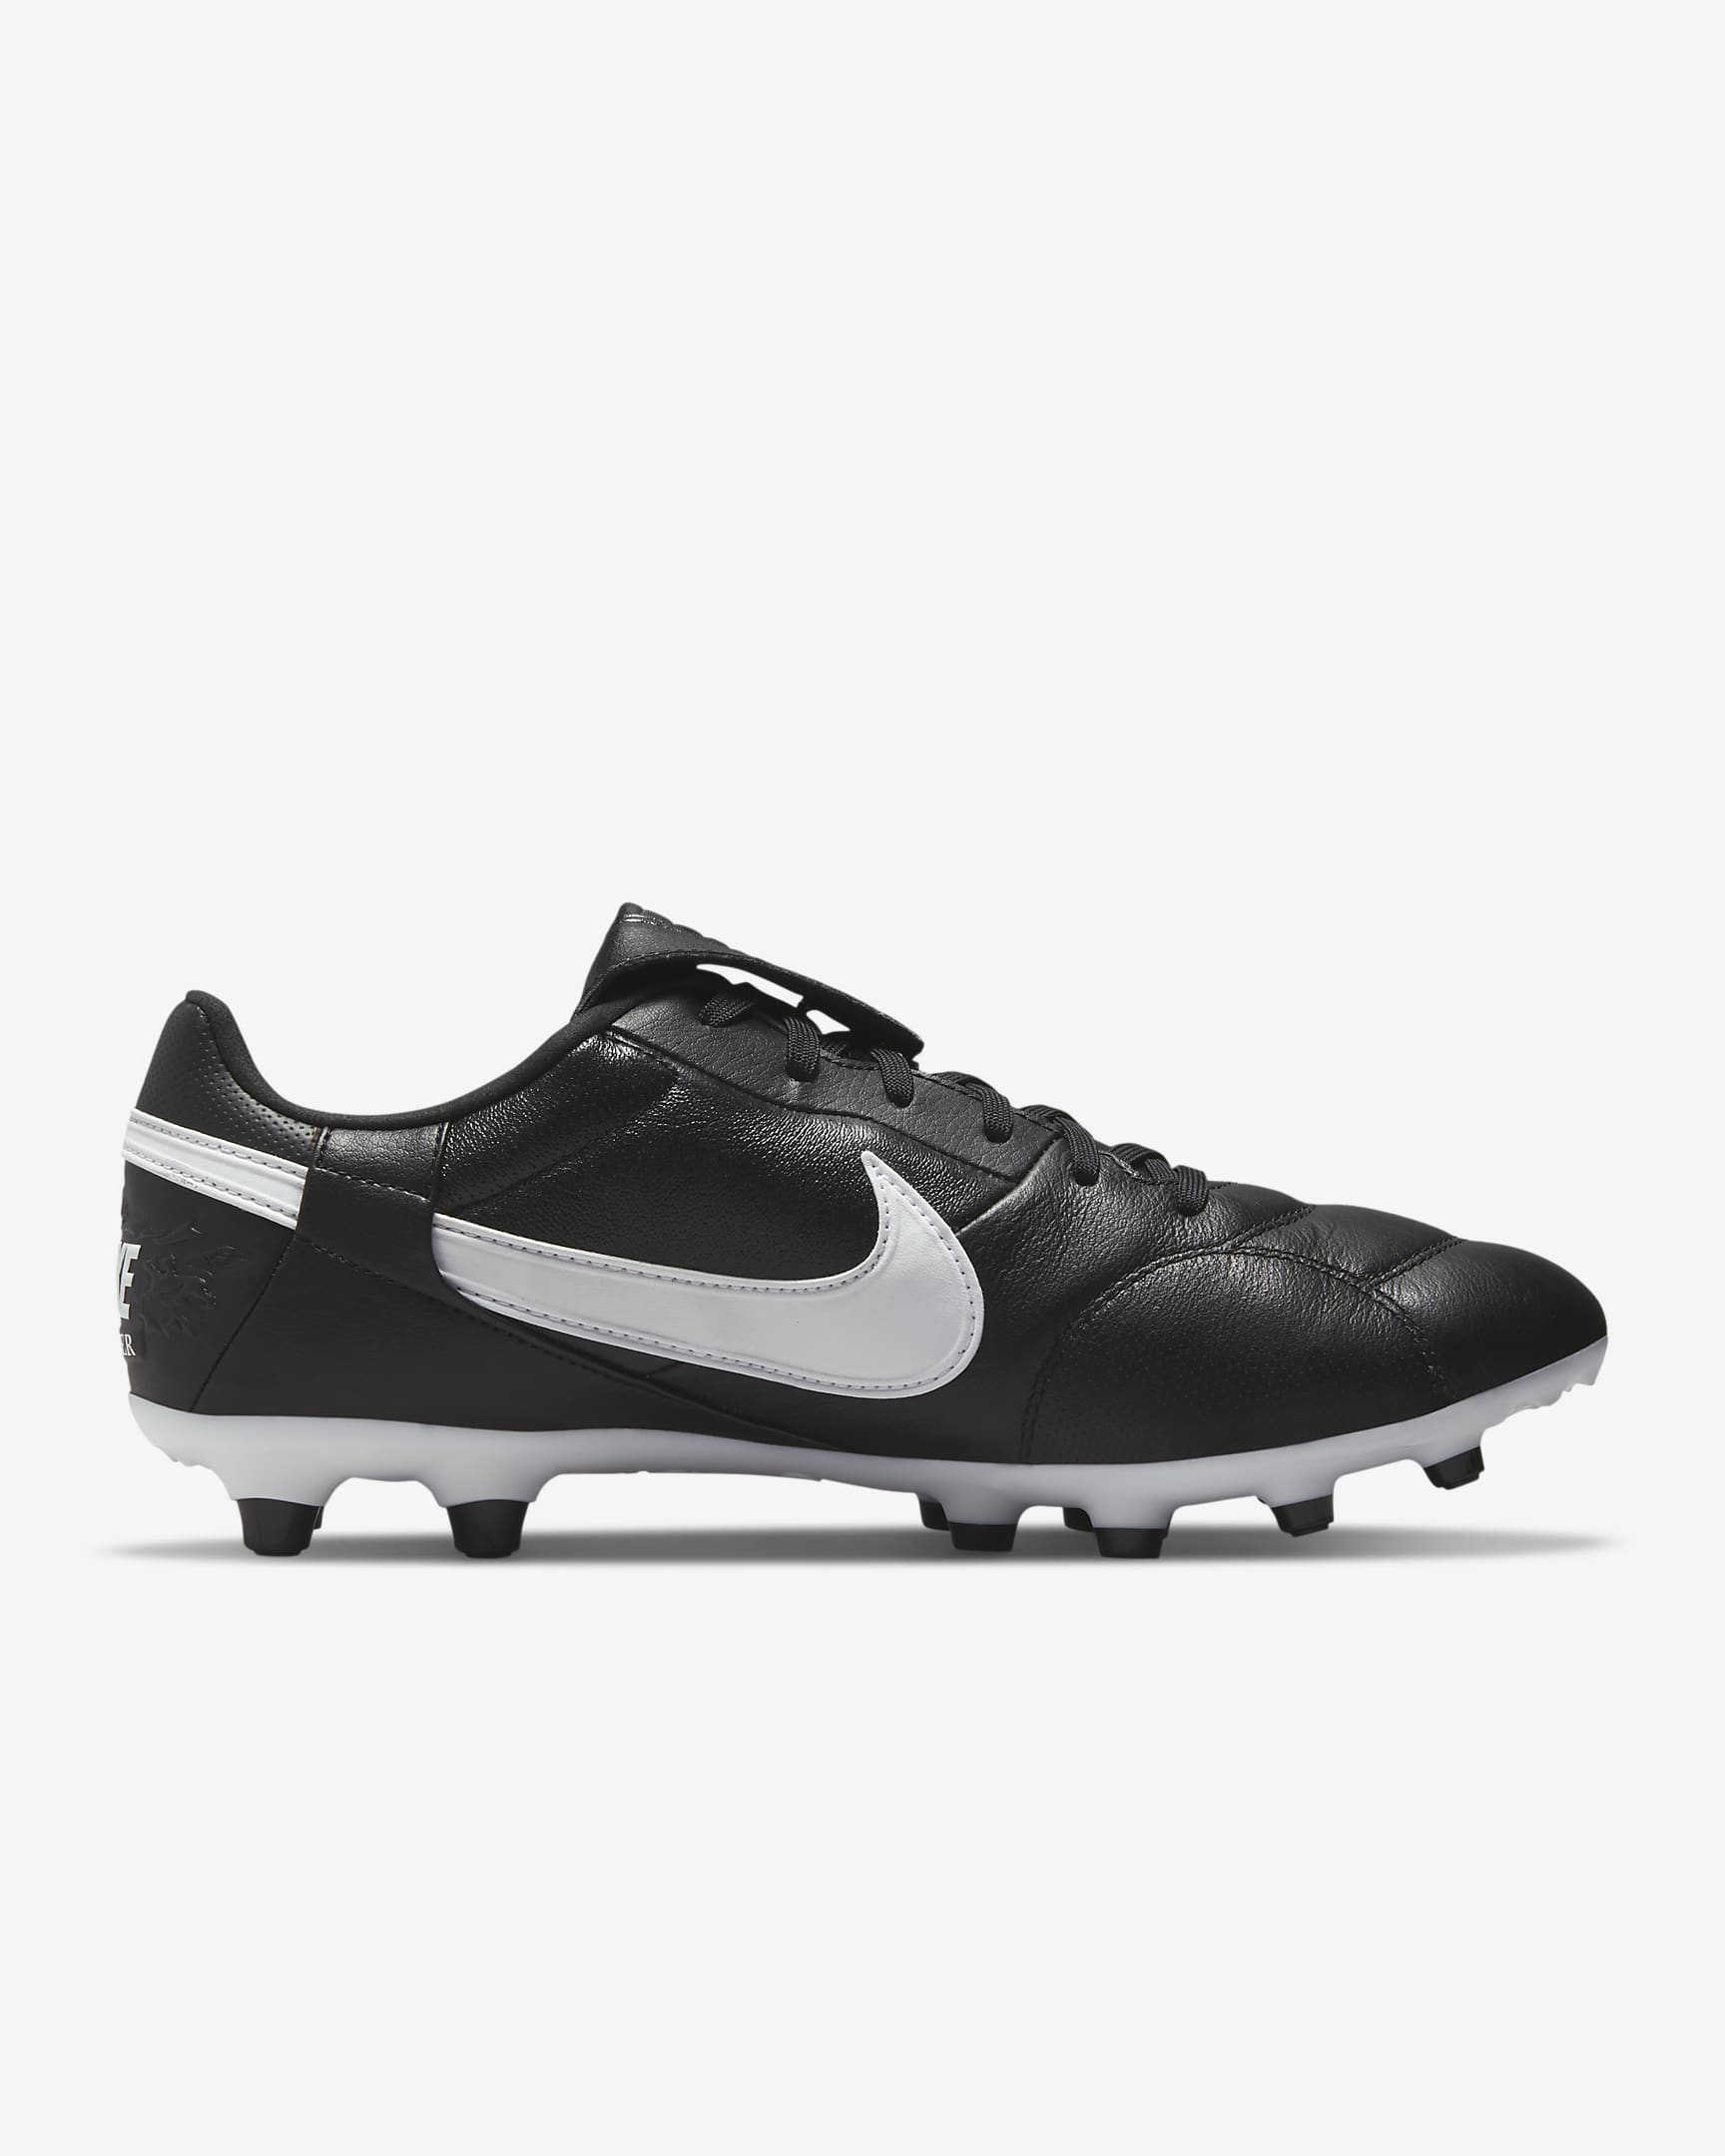 NikePremier 3 Firm-Ground Low-Top Football Boot - Black/White